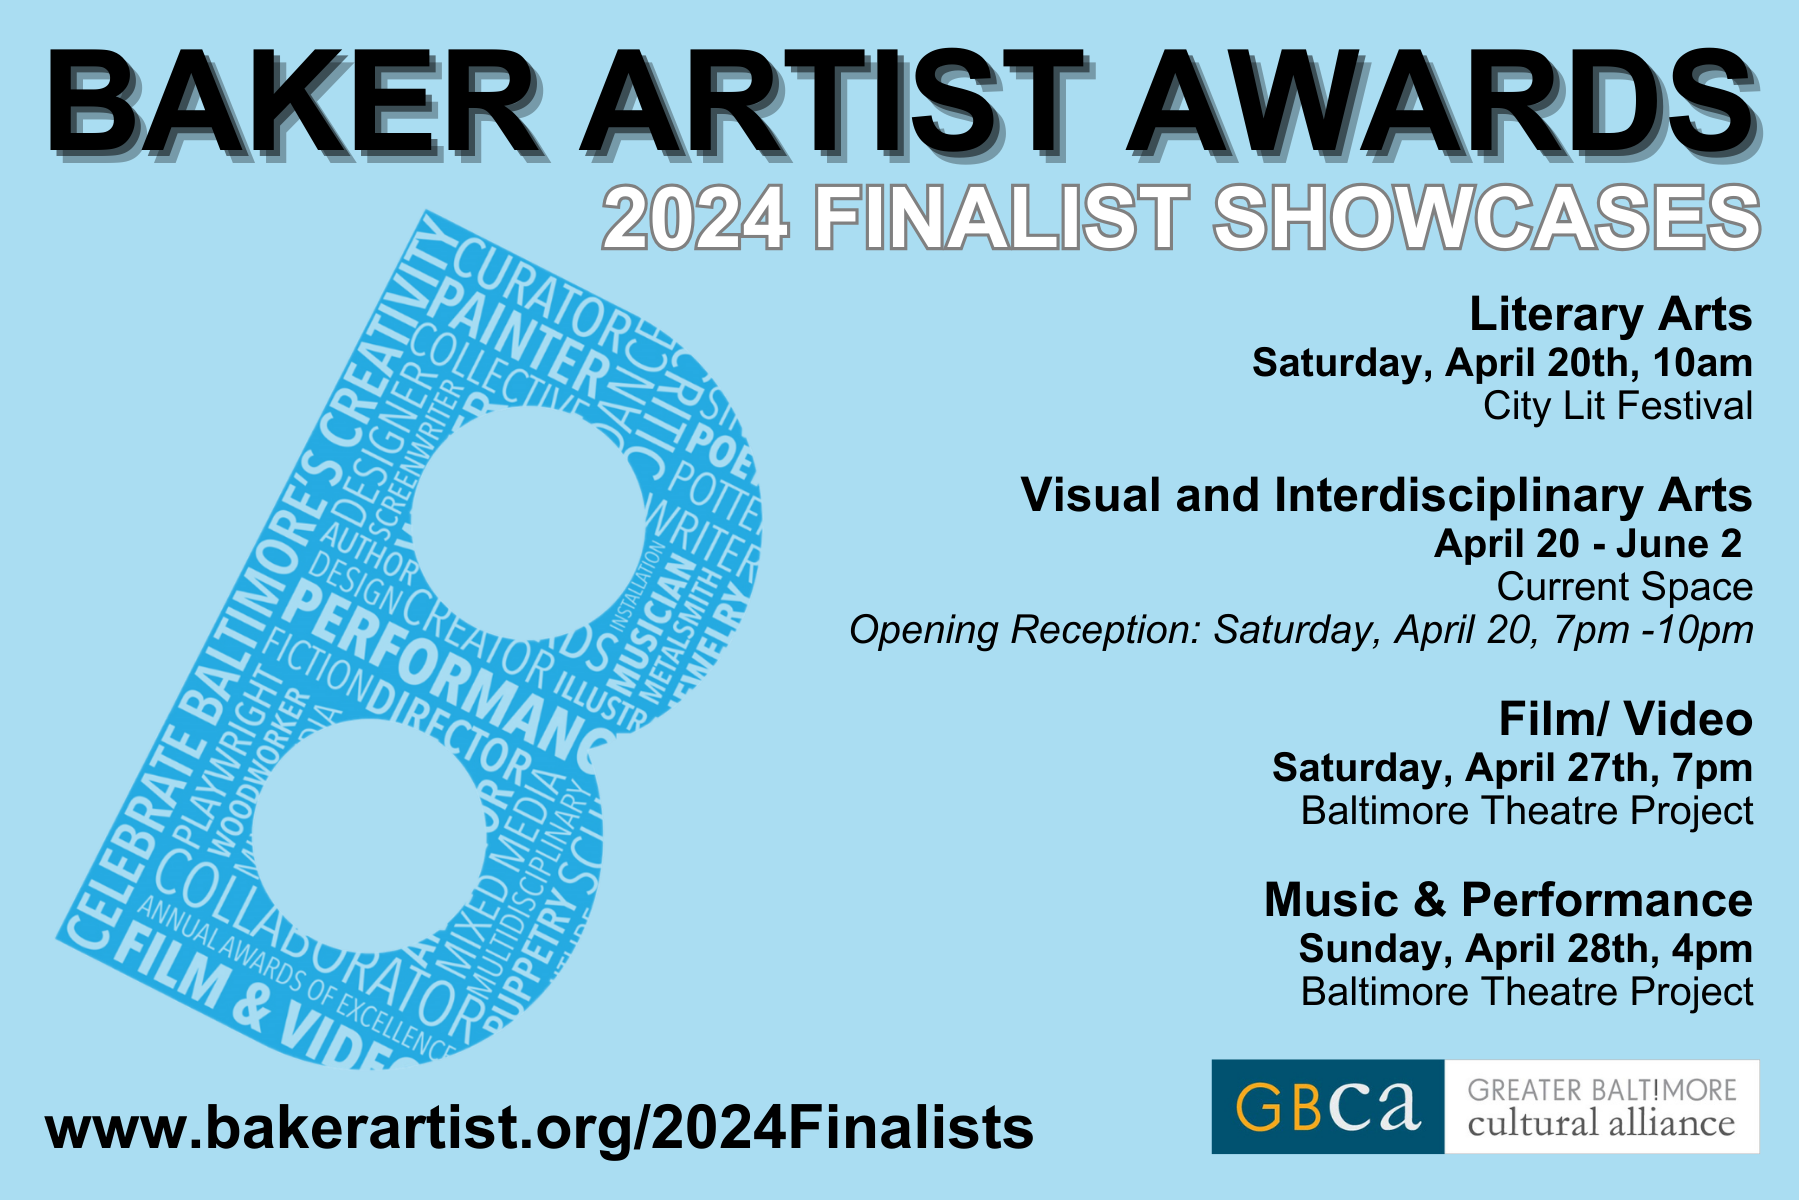 rectangular graphic announcing Baker Artist Awards 2024 Finalist Showcases in block letters.  Below that is the Baker tilted B logo and the dates and locations of the showcases as are listed below this image.